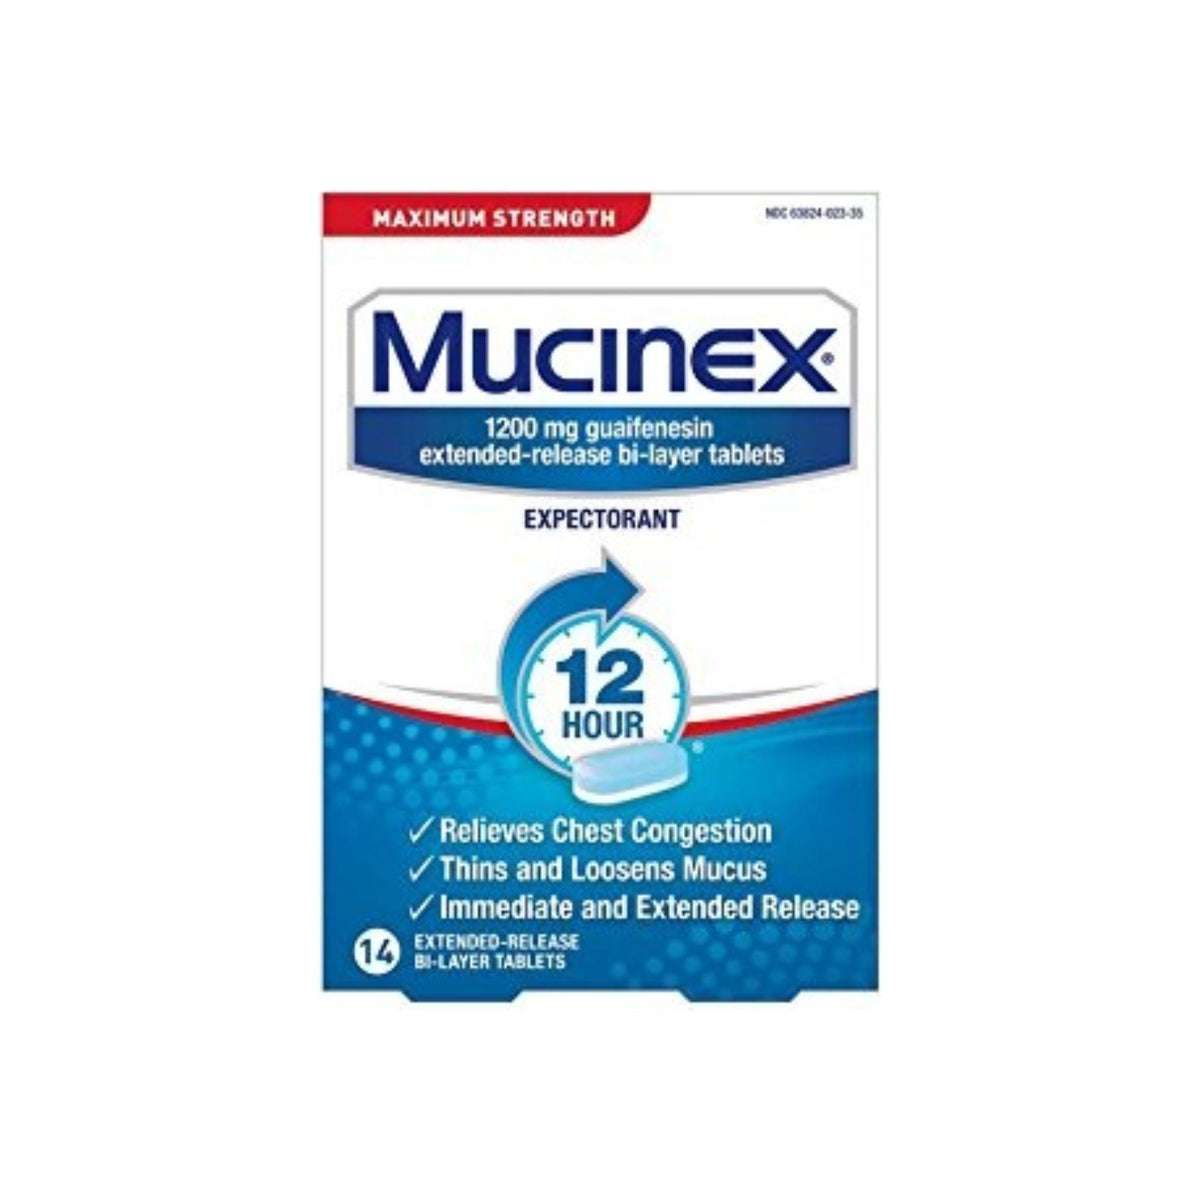 Mucinex 12 Hr Max Strength Chest Congestion Expectorant Tablets, 14ct ...